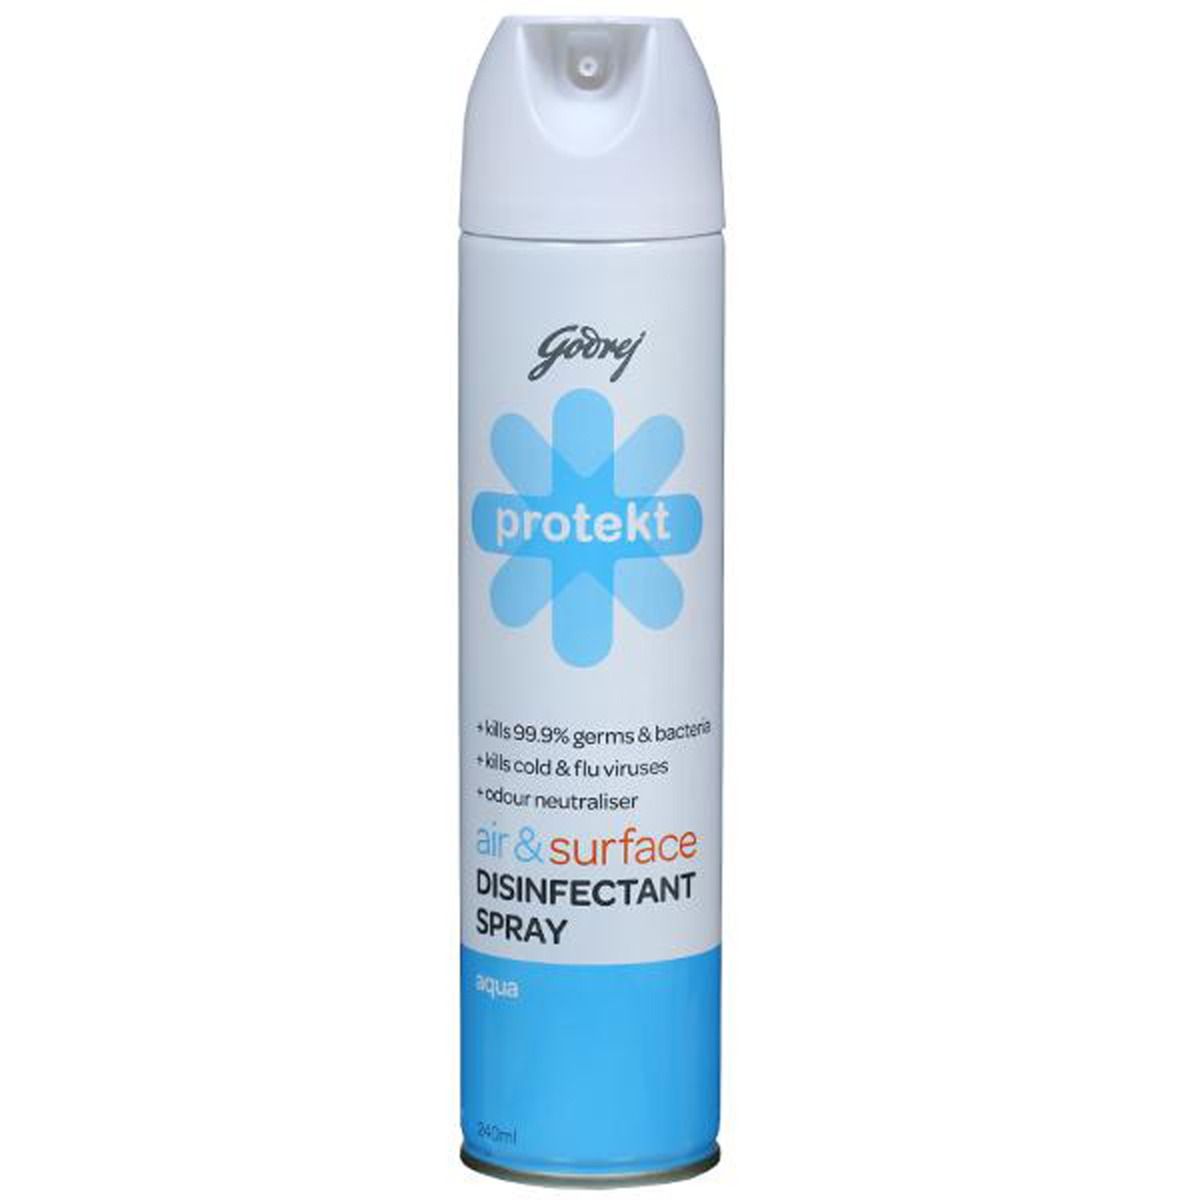 Protekt Aqua Air & Surface Disinfectant Spray, 240 ml, Pack of 1 